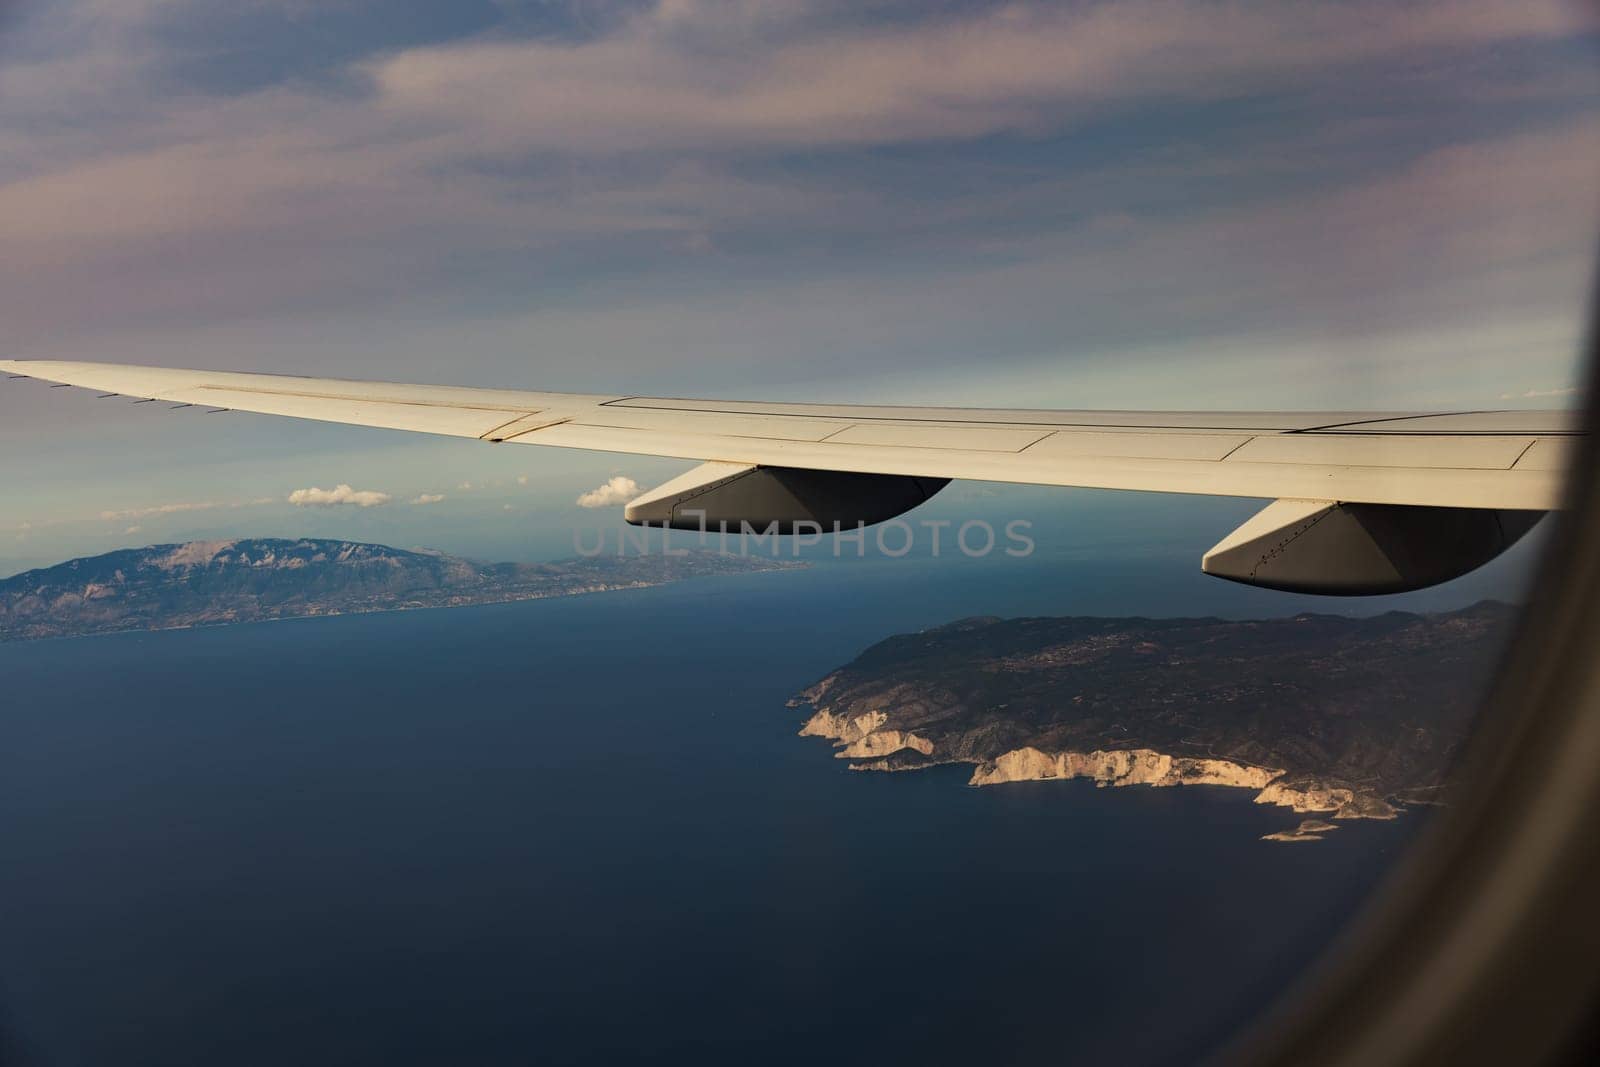 A beautiful view of the white wing of an airplane against the backdrop of a blurred island in the blue sea through the window in the evening summer during a flight, close-up side view.